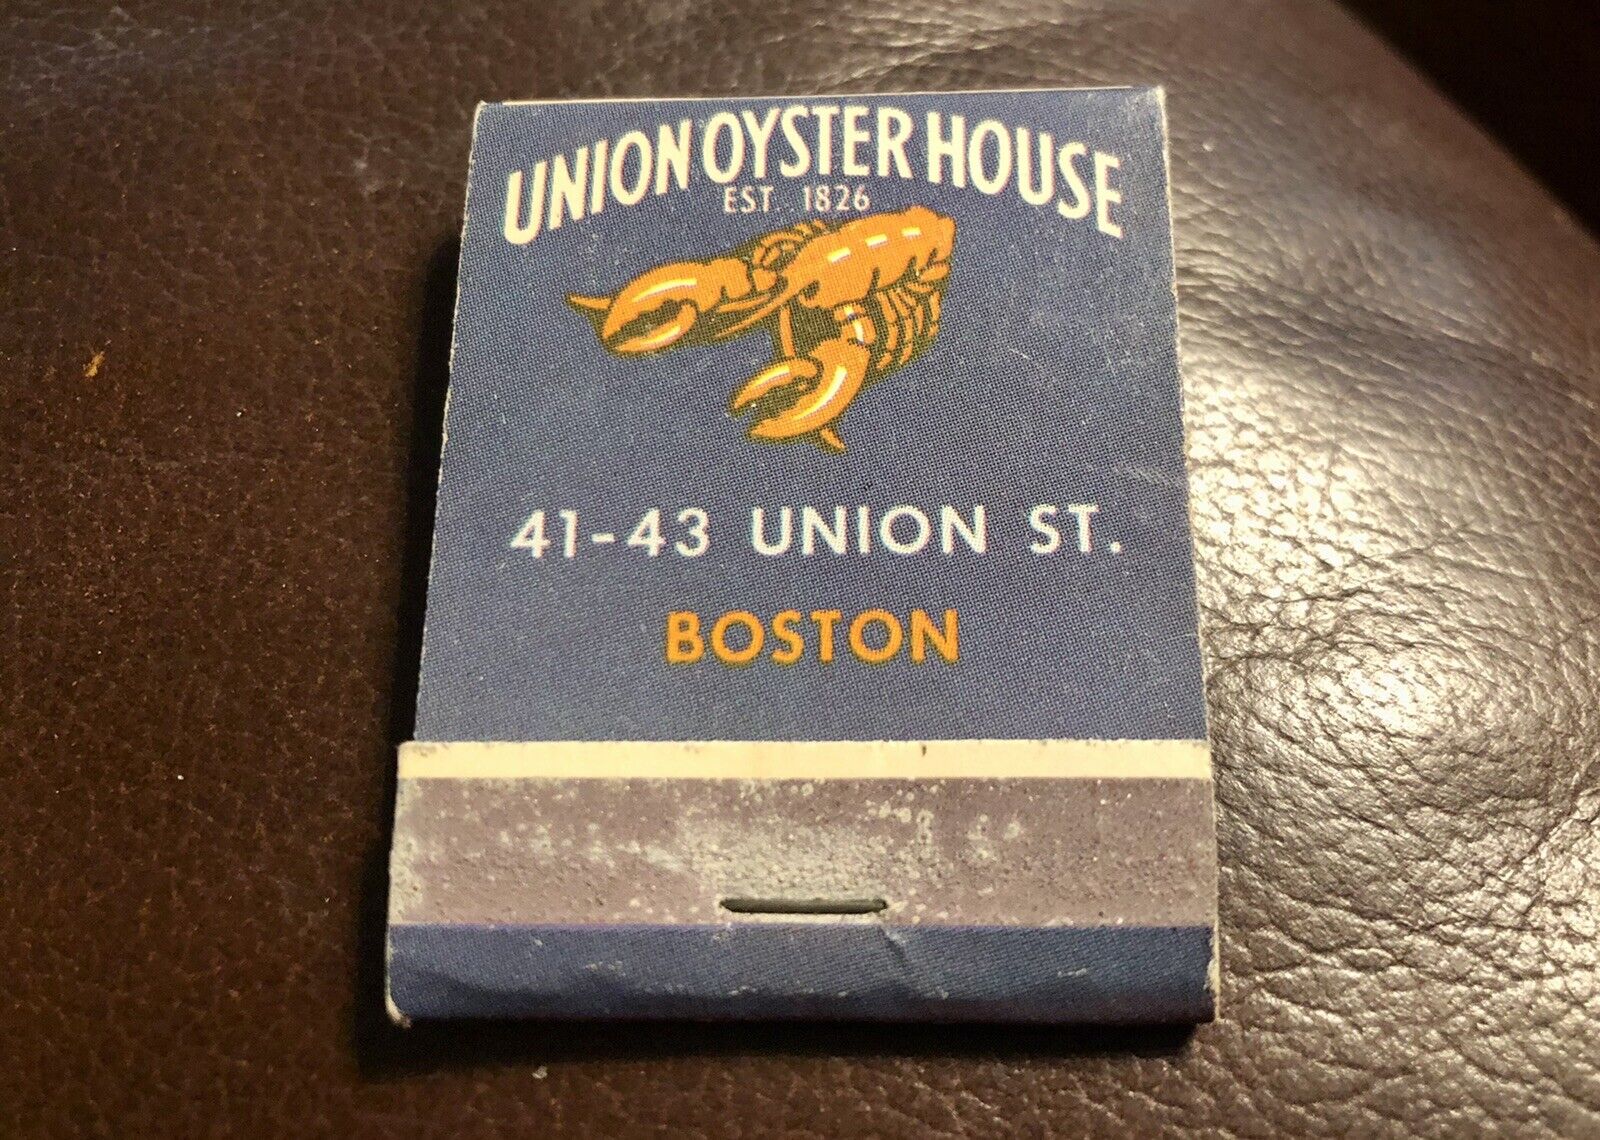 Union Oyster House, Boston, MA, Full Front Strike Matchbook W/ Printed Matches